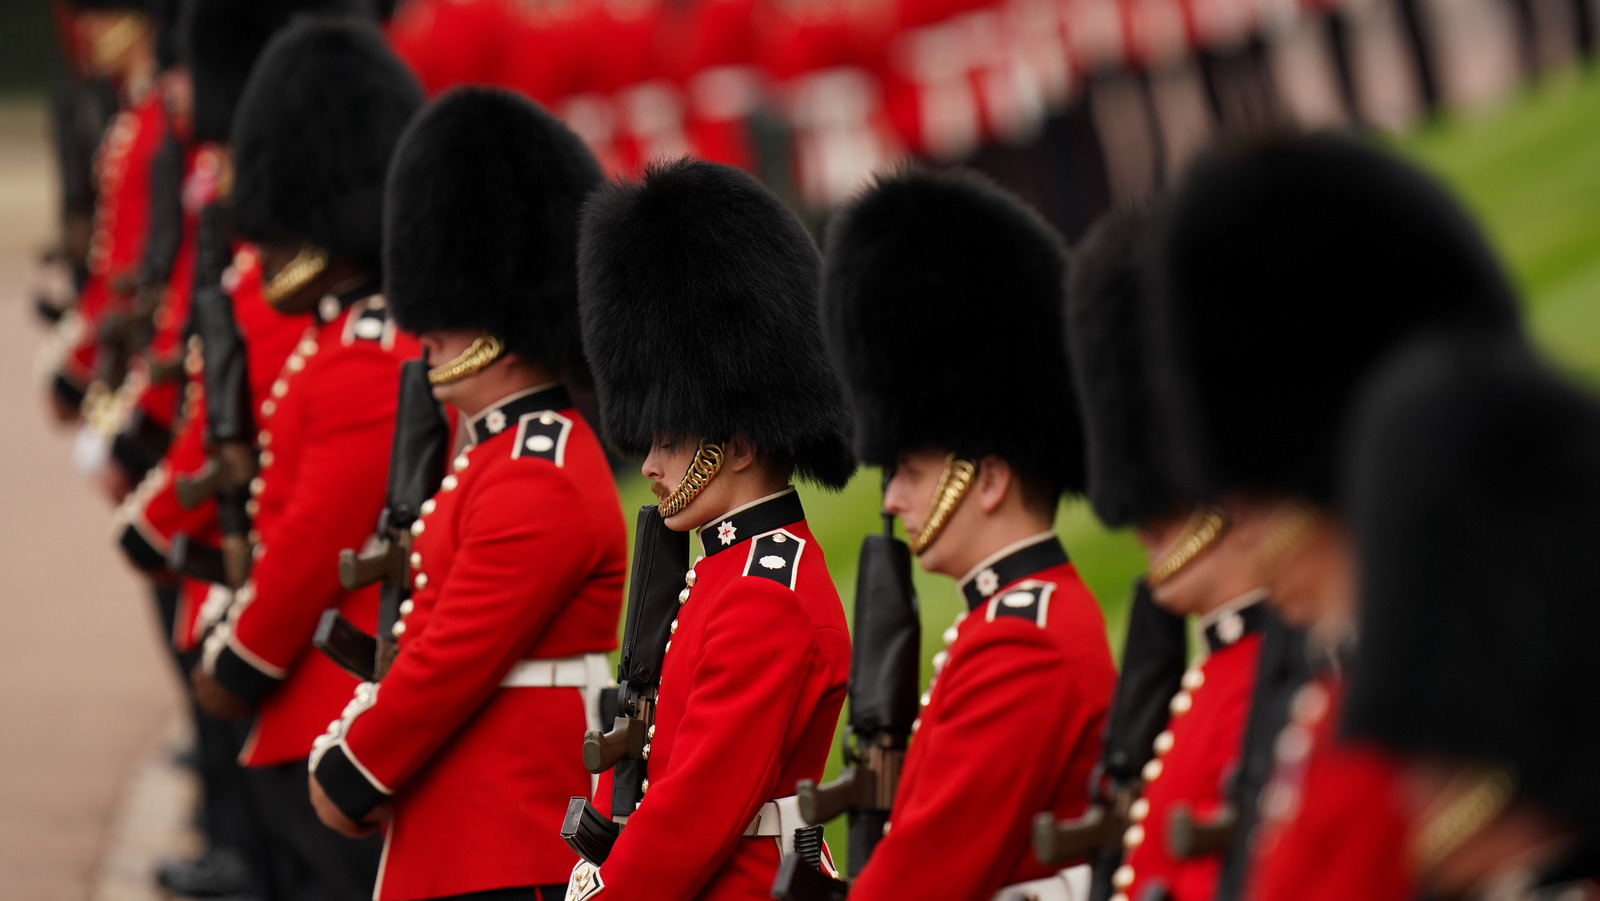 20 INAPPROPRIATE MOMENTS WITH ROYAL GUARDS